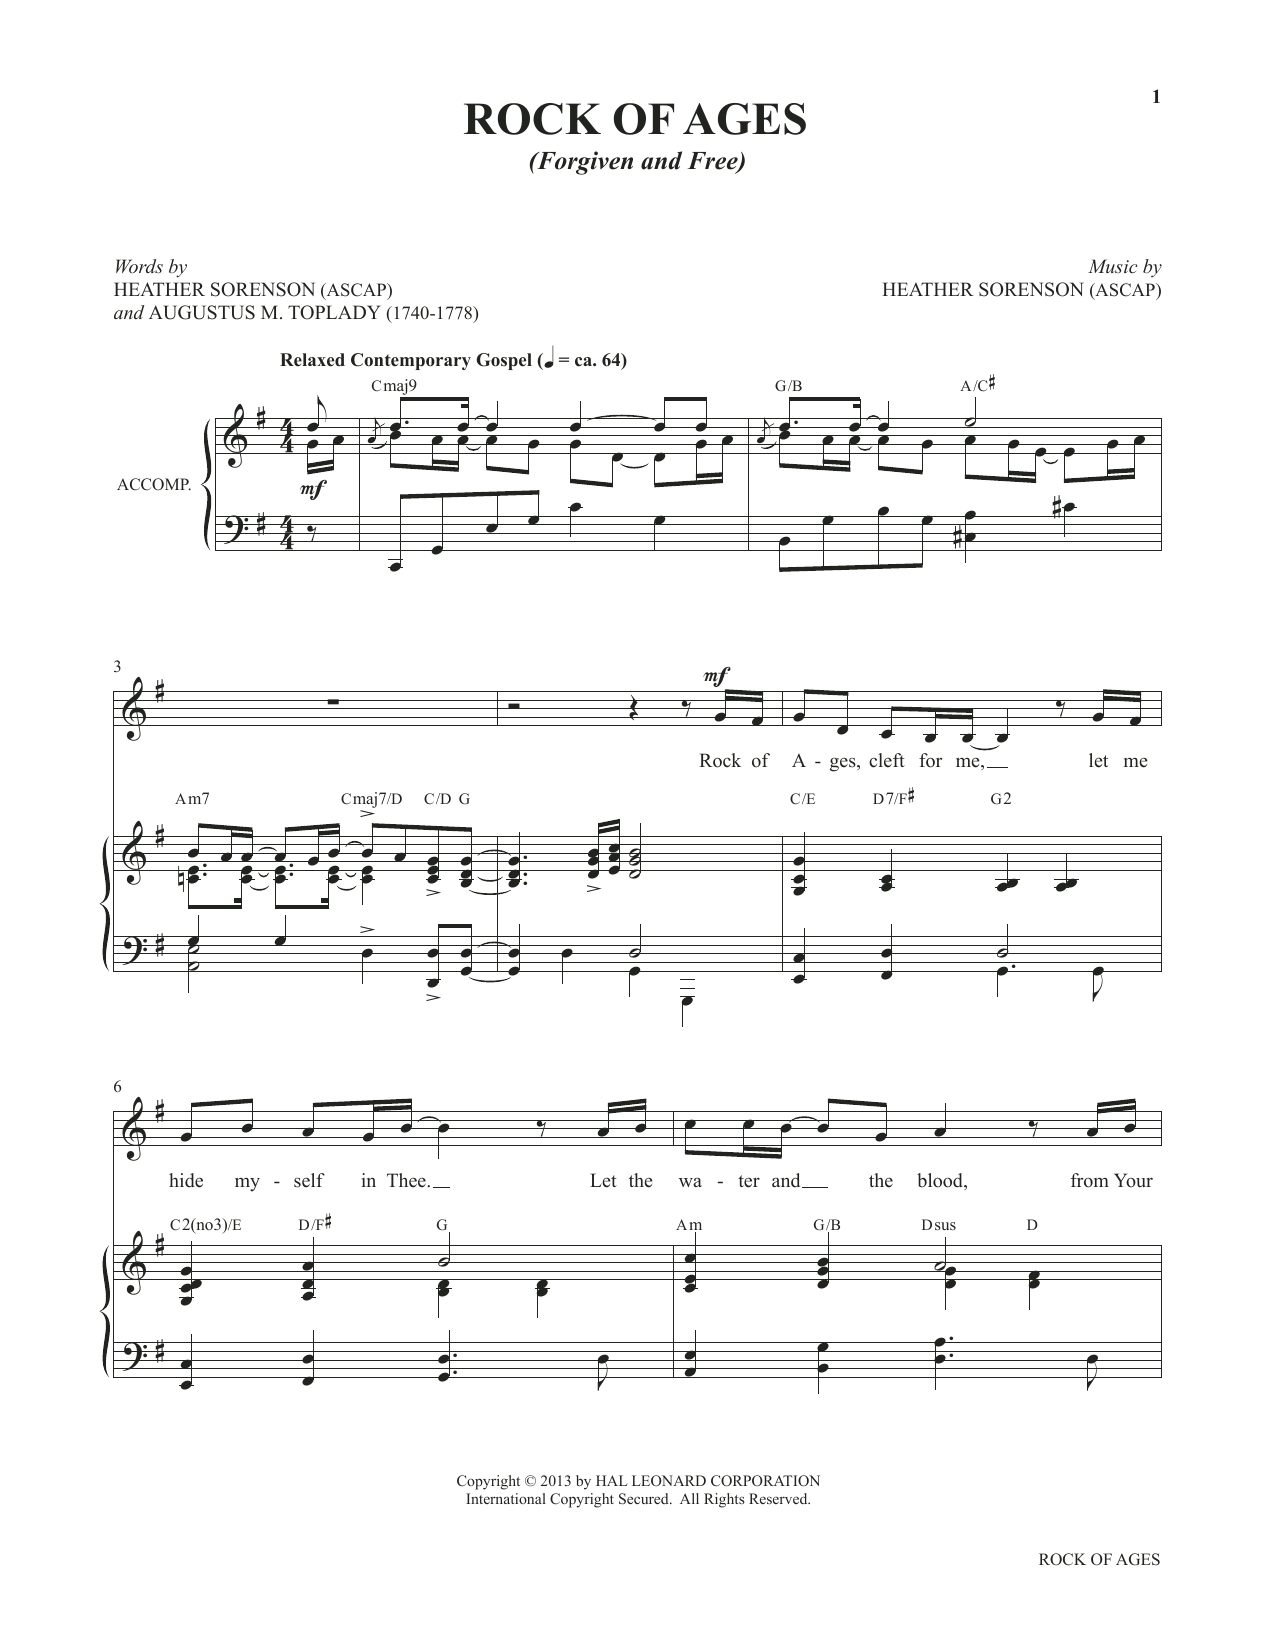 Download Heather Sorenson Rock Of Ages (Forgiven And Free) (from Sheet Music